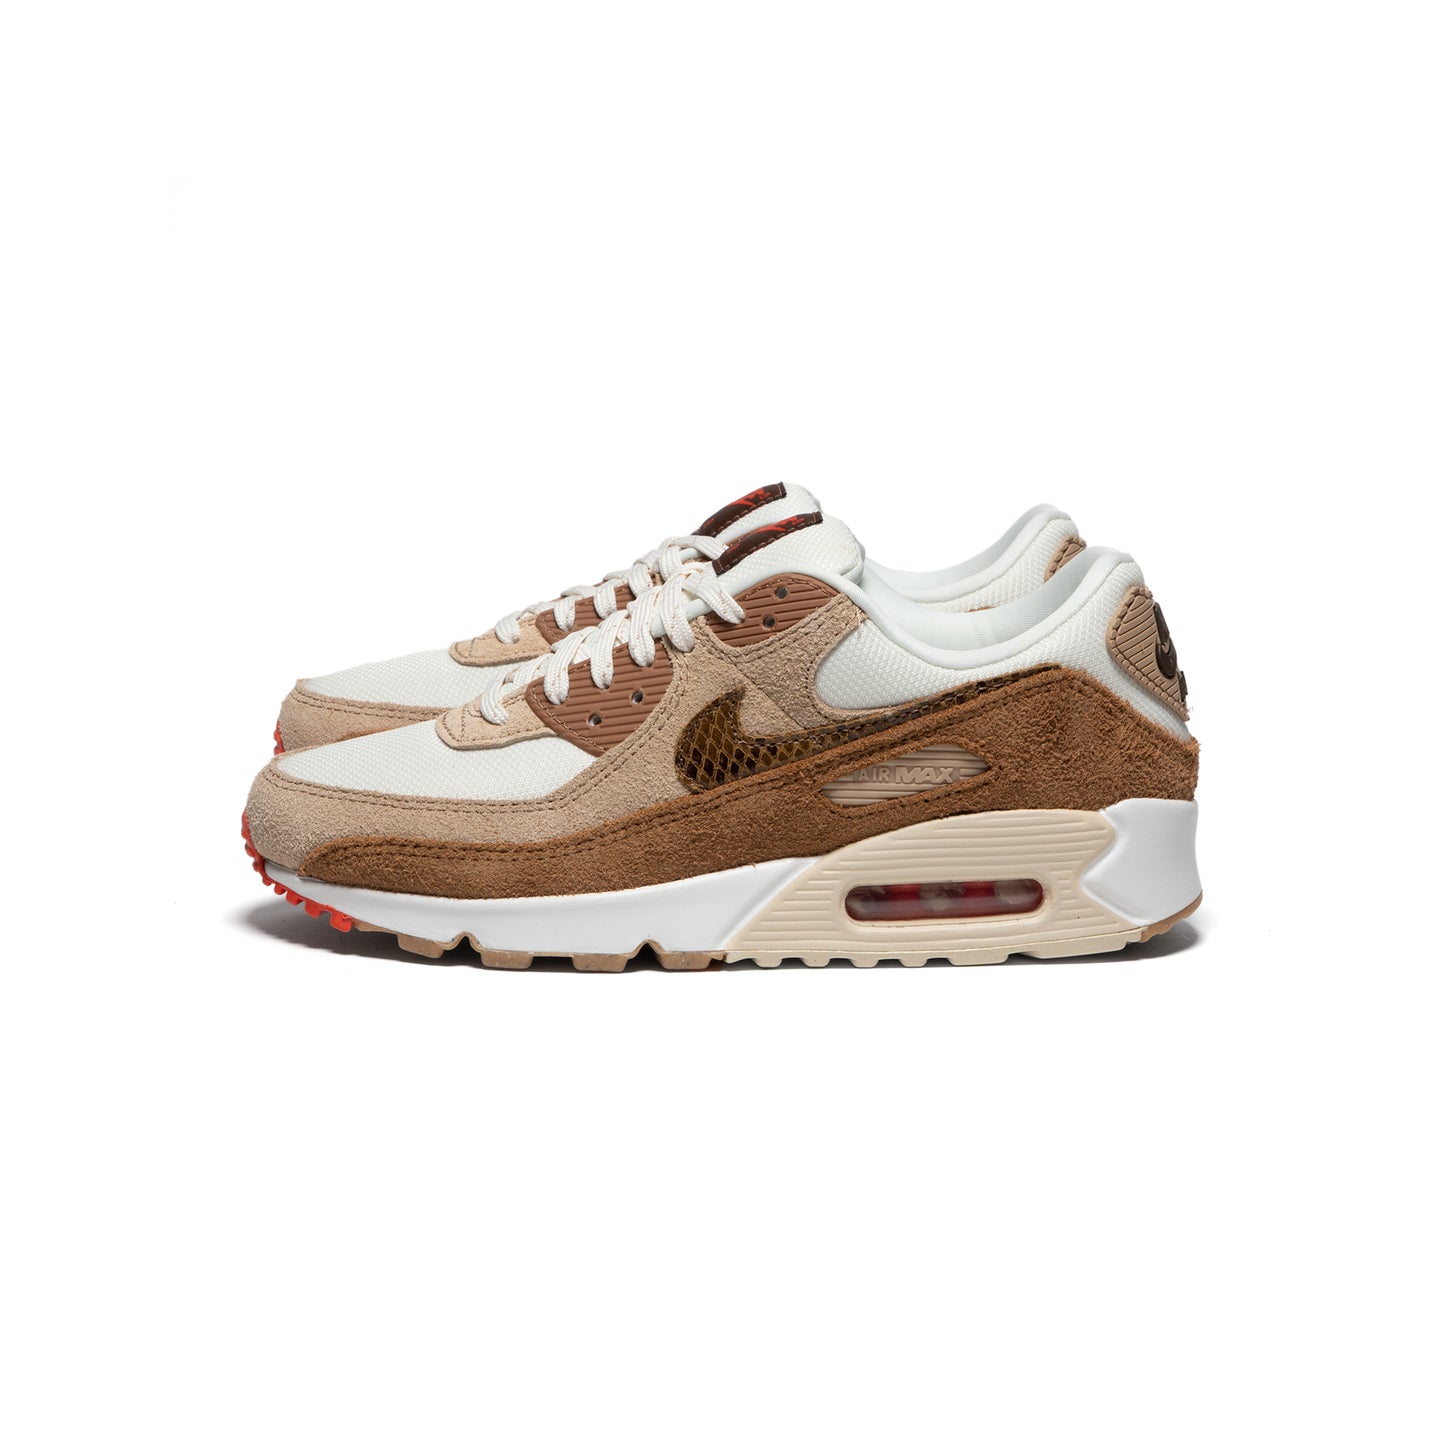 Nike Womens Air Max 90 SE (Pale Ivory/Picante Red/Summit White)